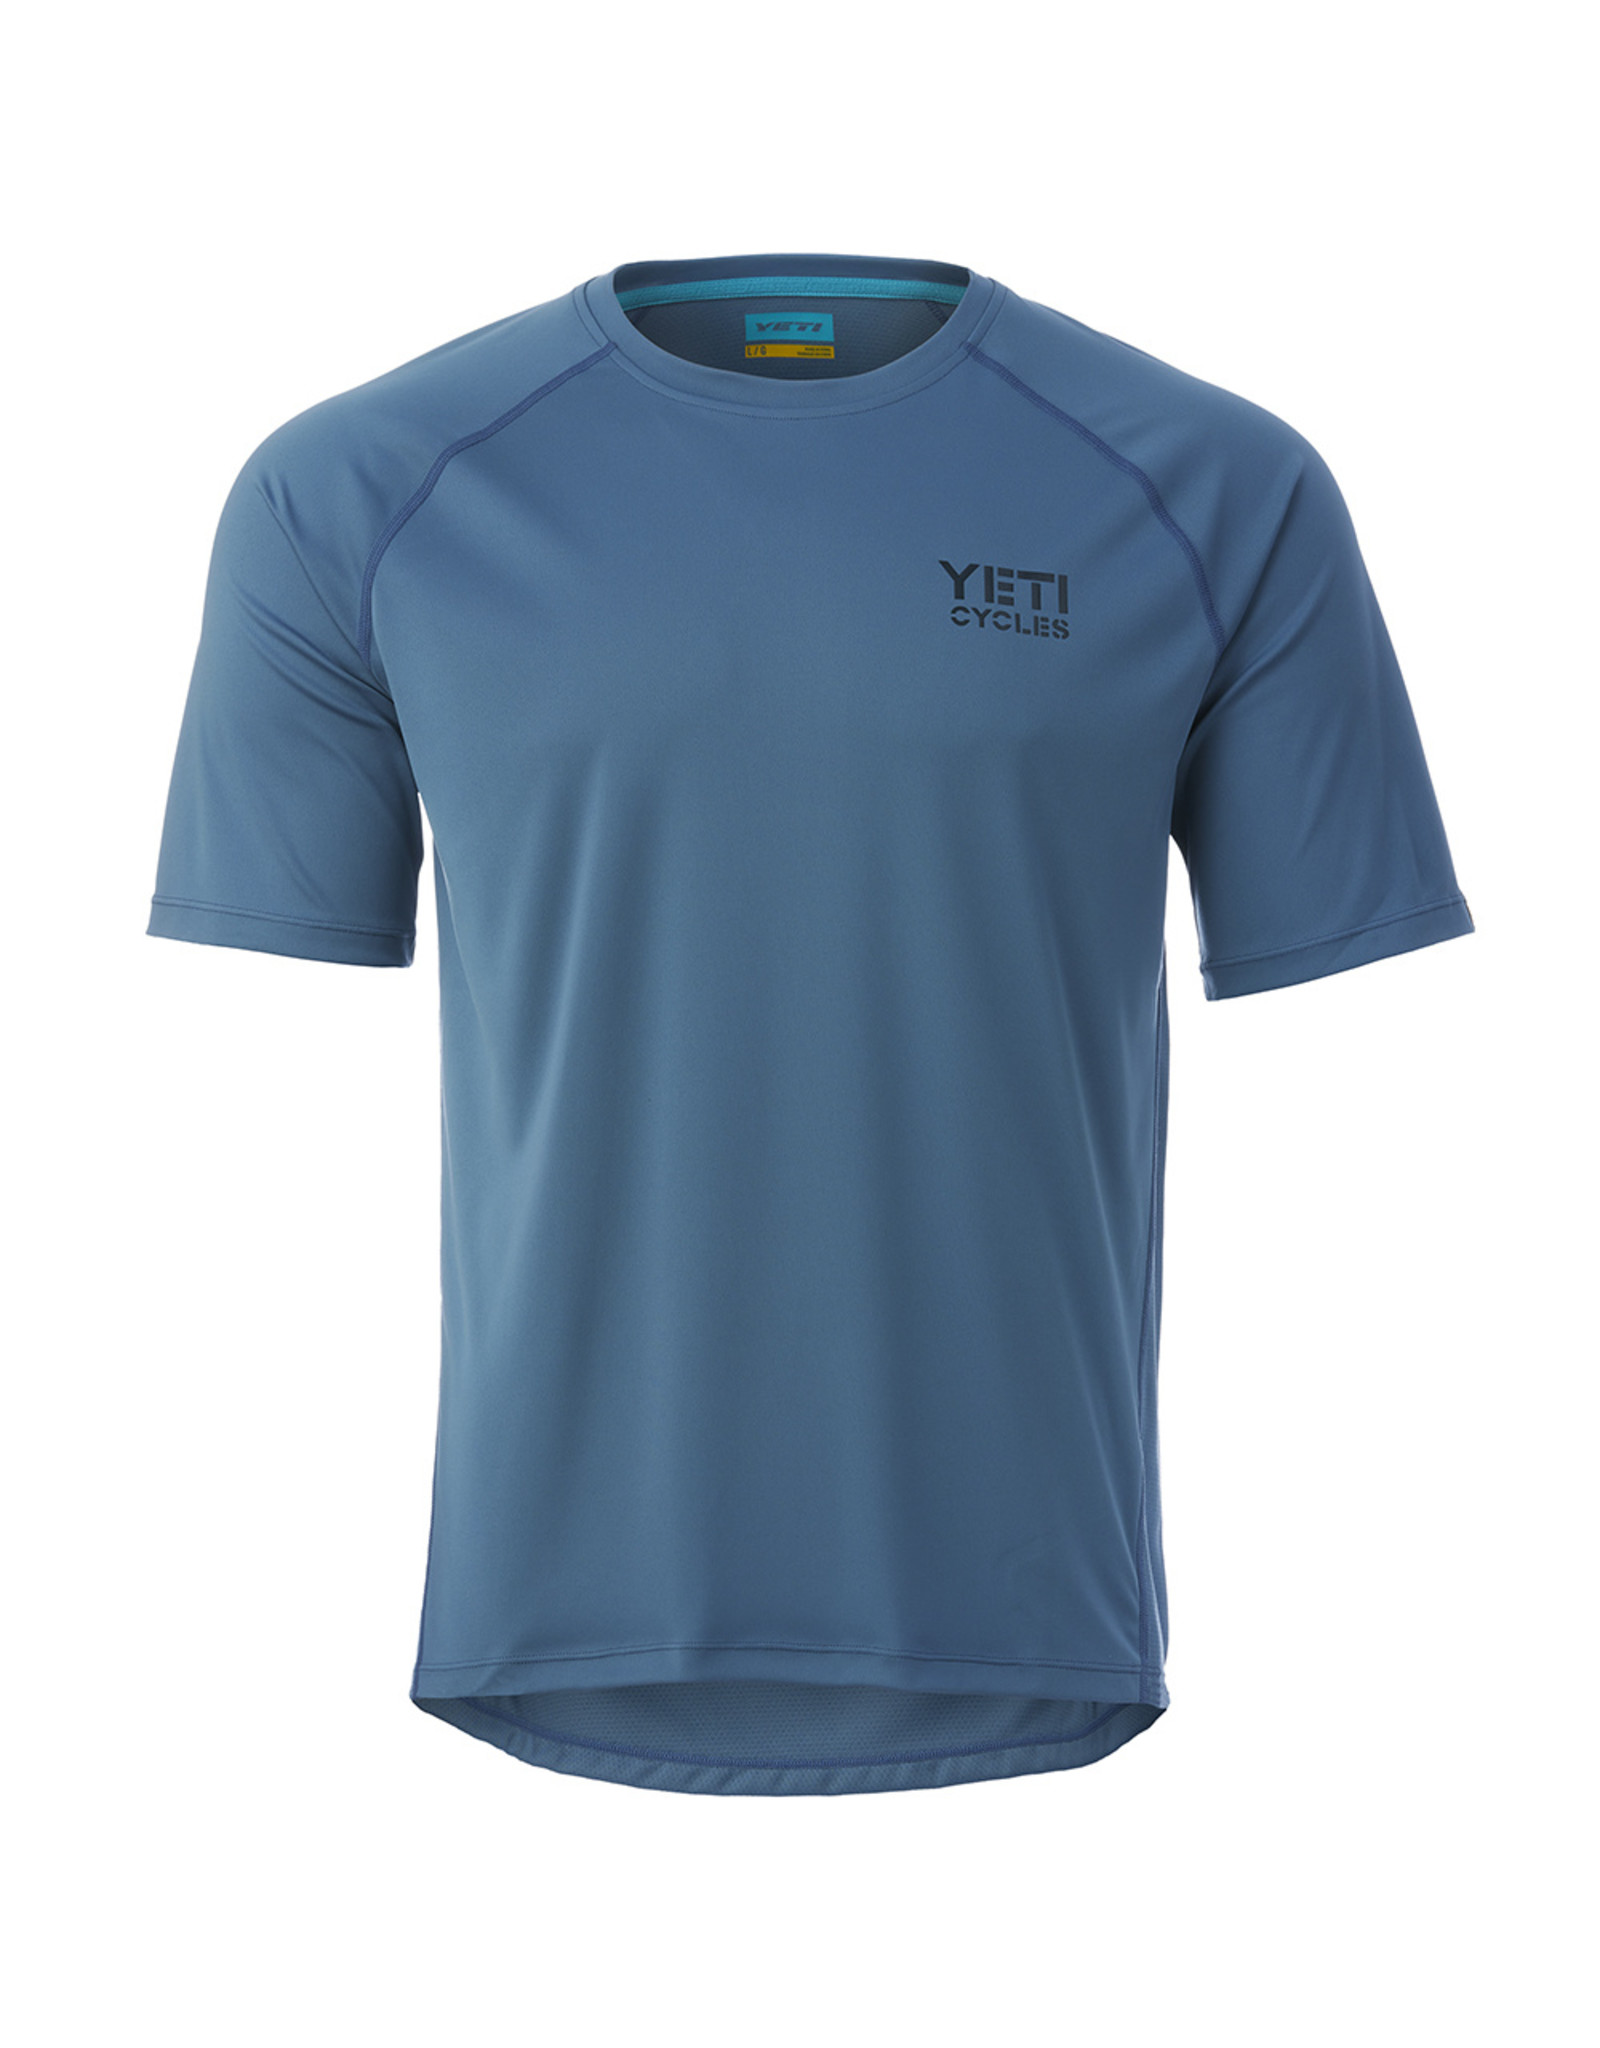 Yeti Cycles TOLLAND S/S JERSEY